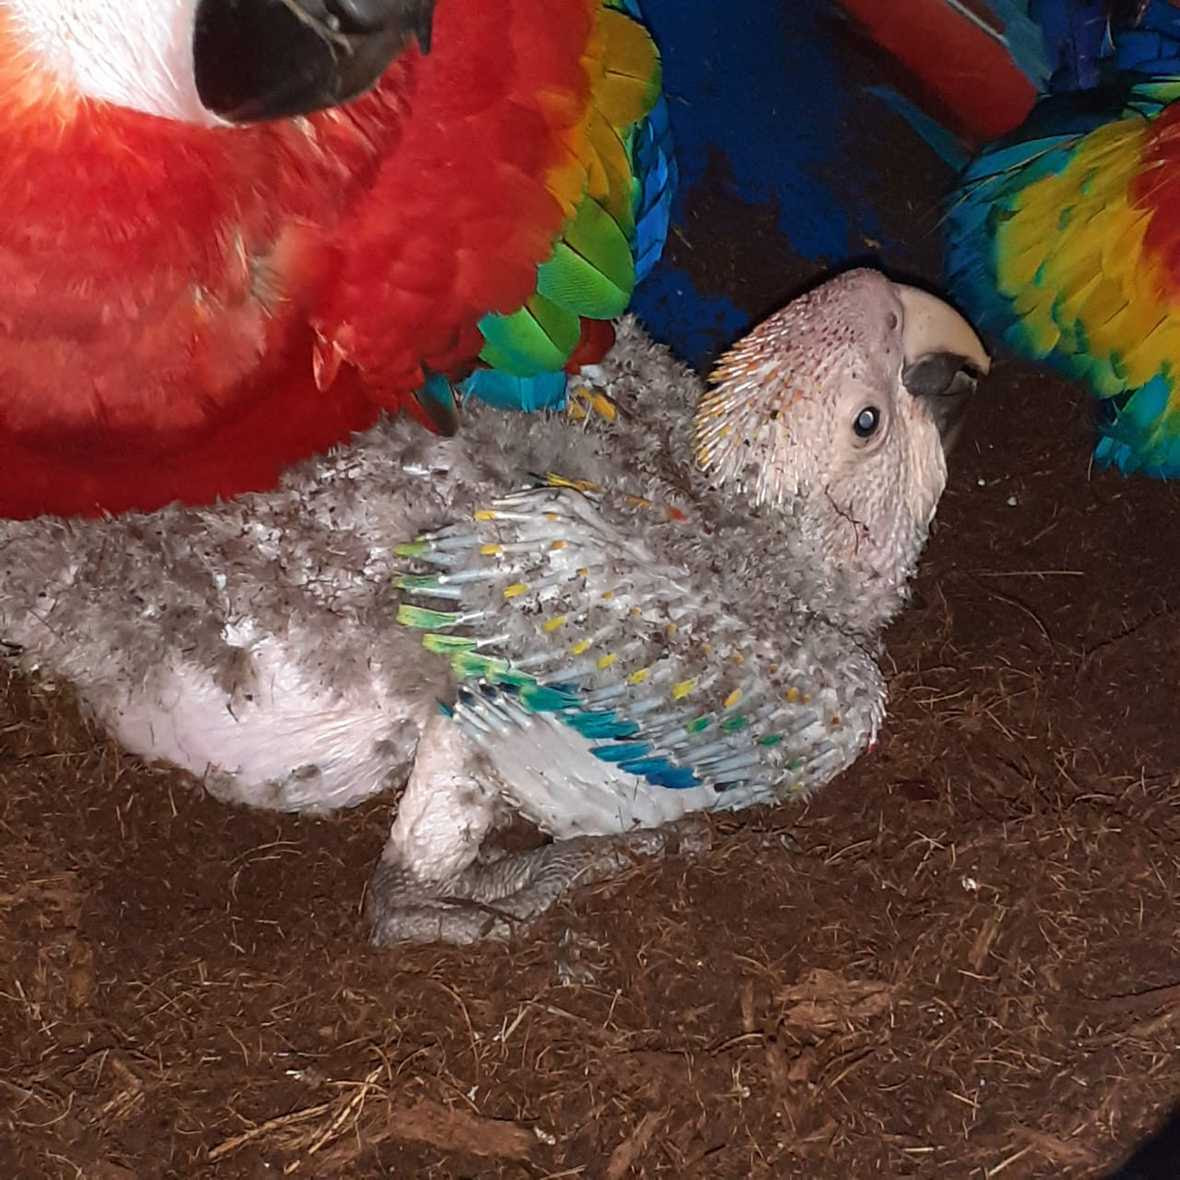 Young baby macaw with some feathers starting to sprout, flanked by parents